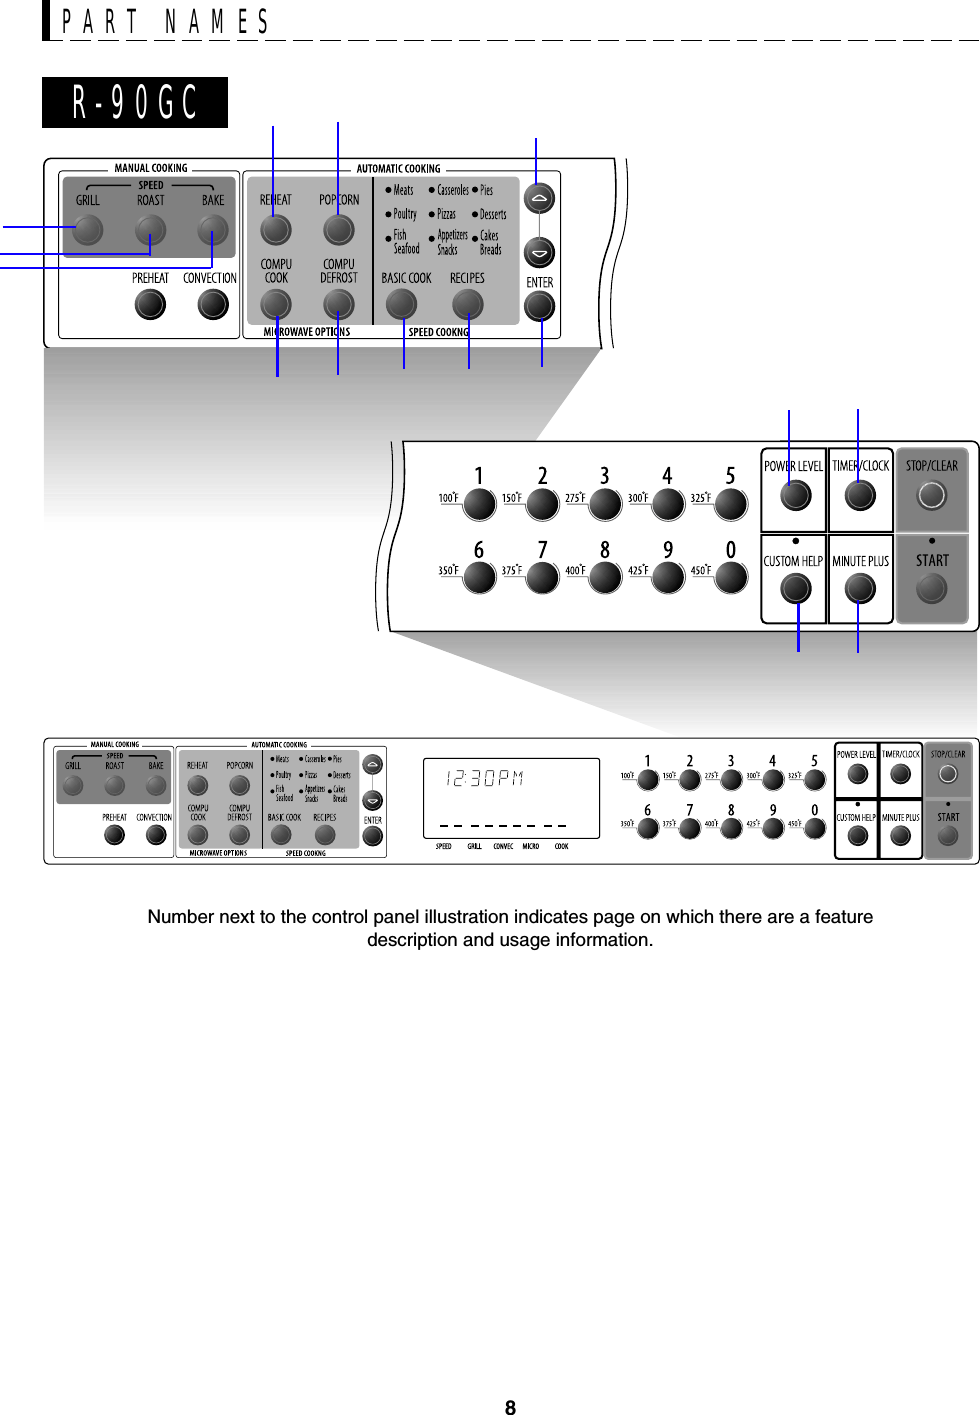 8Number next to the control panel illustration indicates page on which there are a featuredescription and usage information.PART NAMESR-90GC